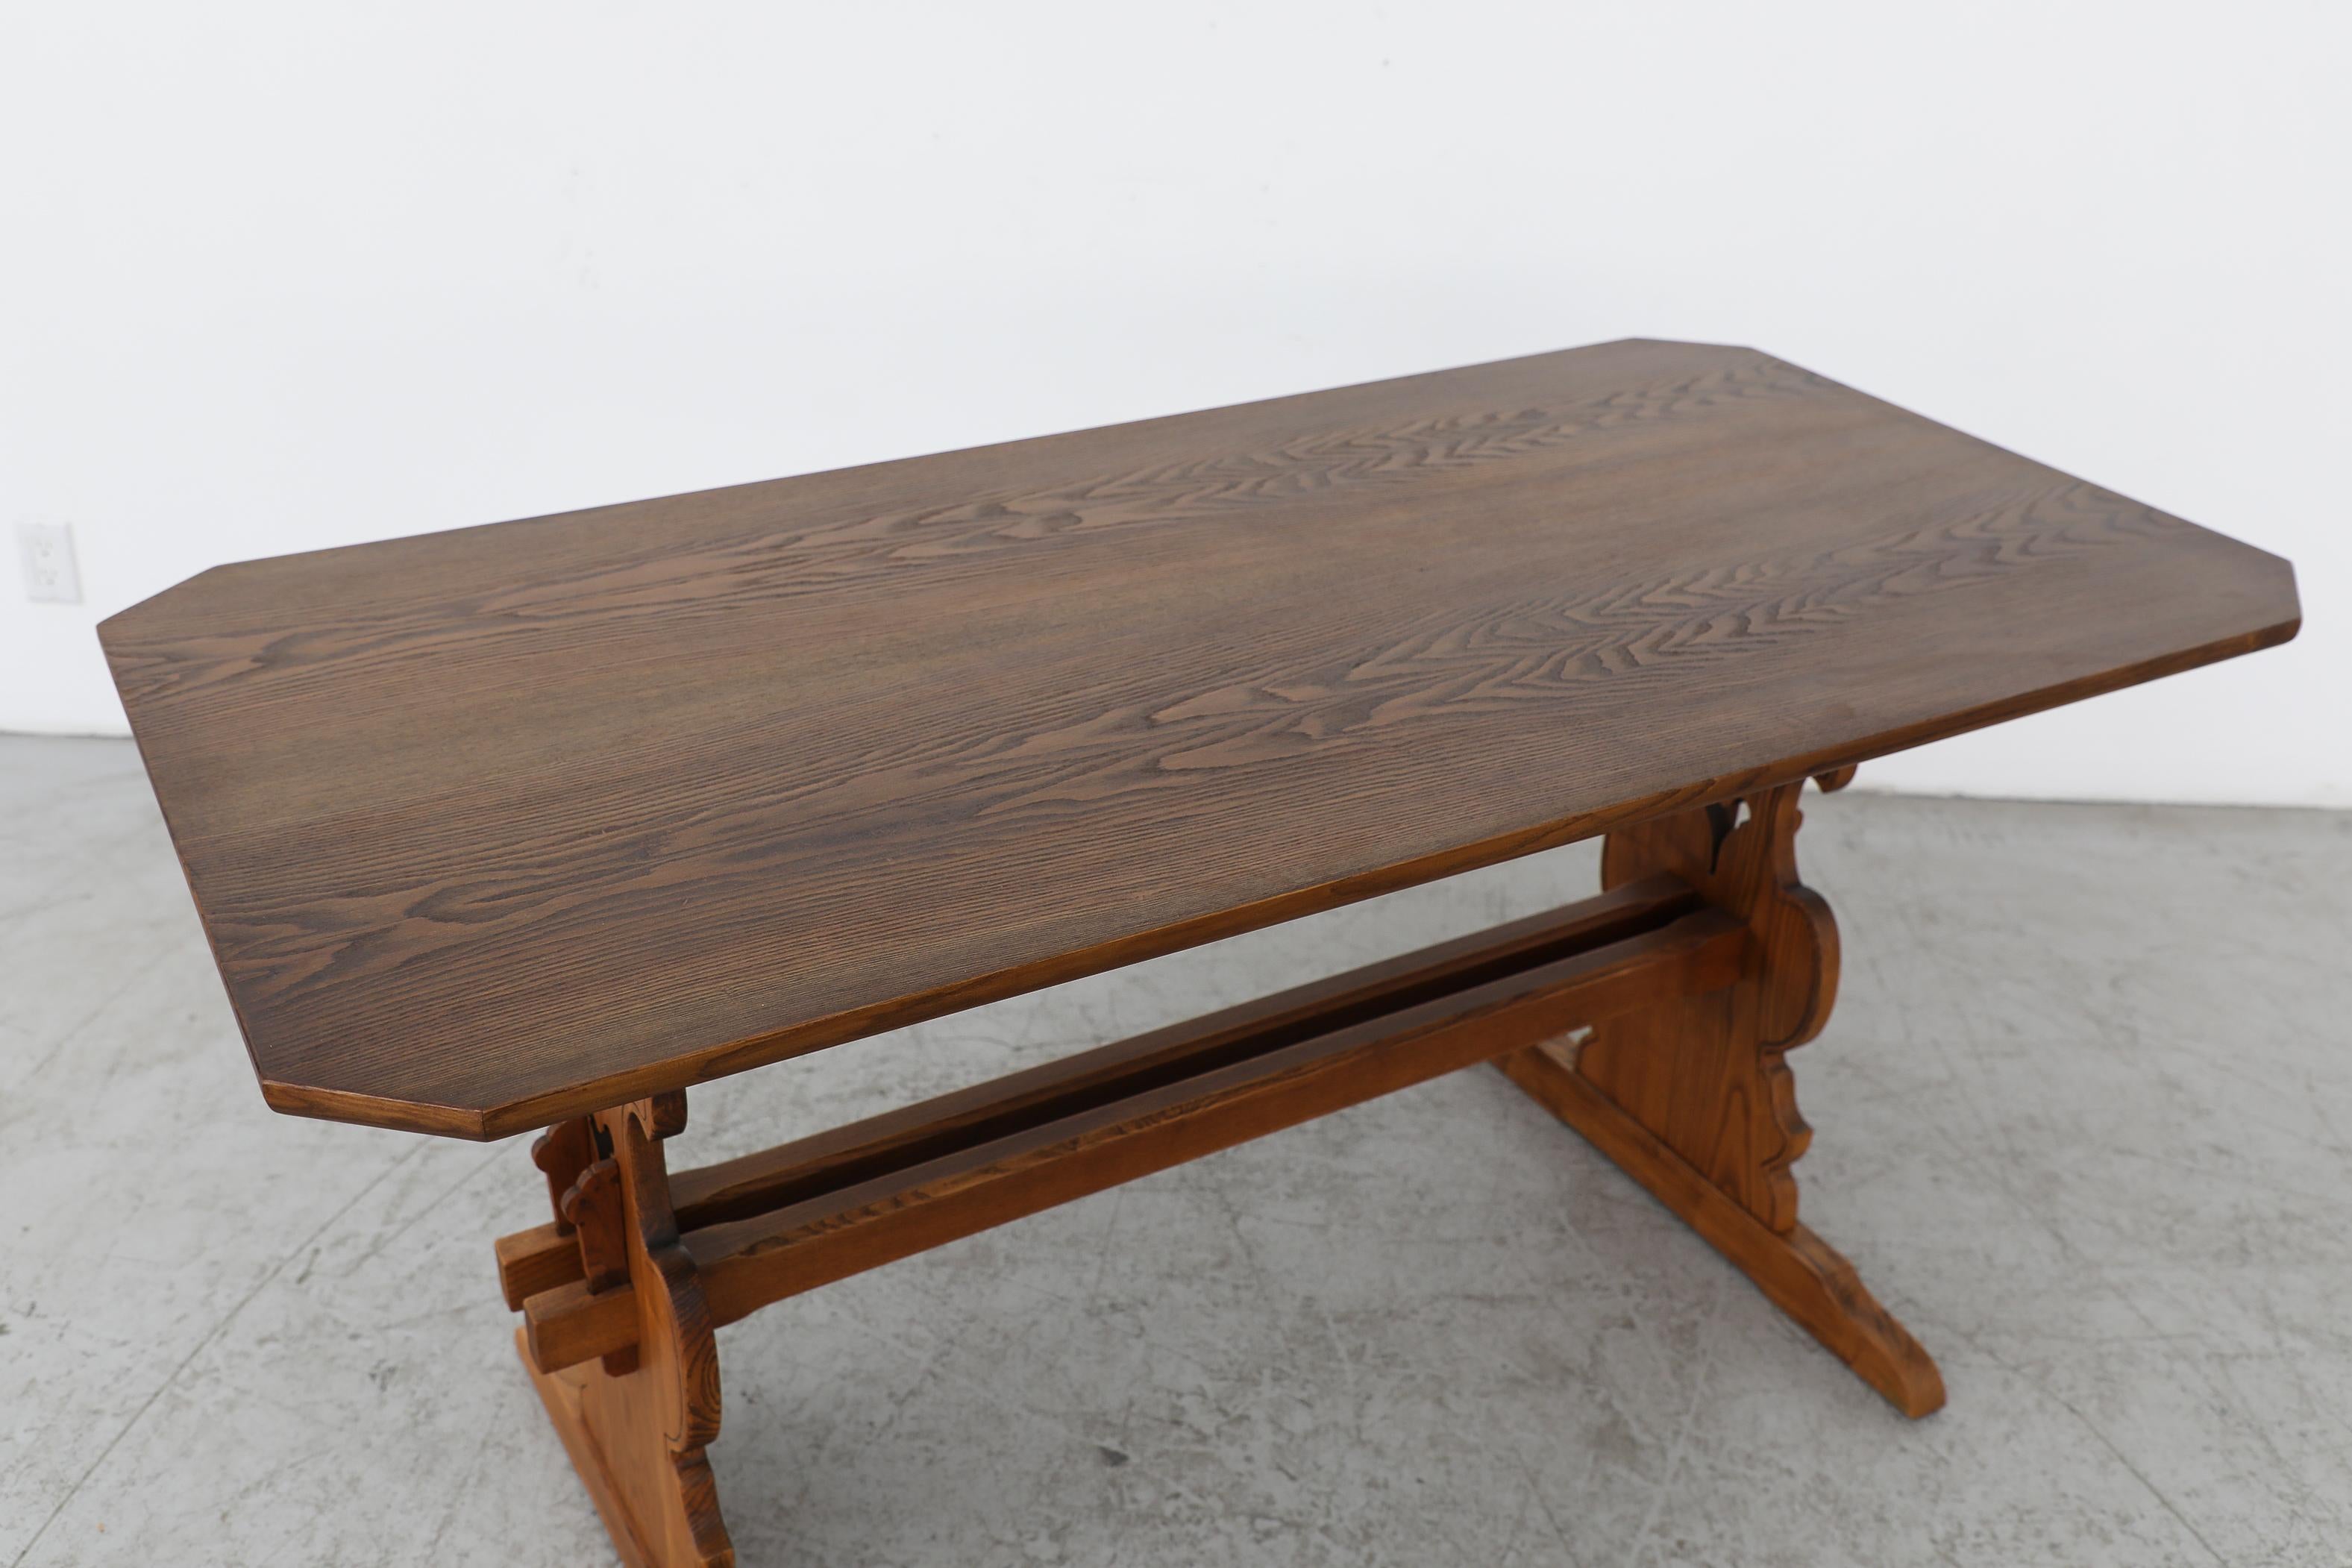 Austrian Ornate Brutalist Tyrolean Style Dark Pine Table with Angled Corners For Sale 1